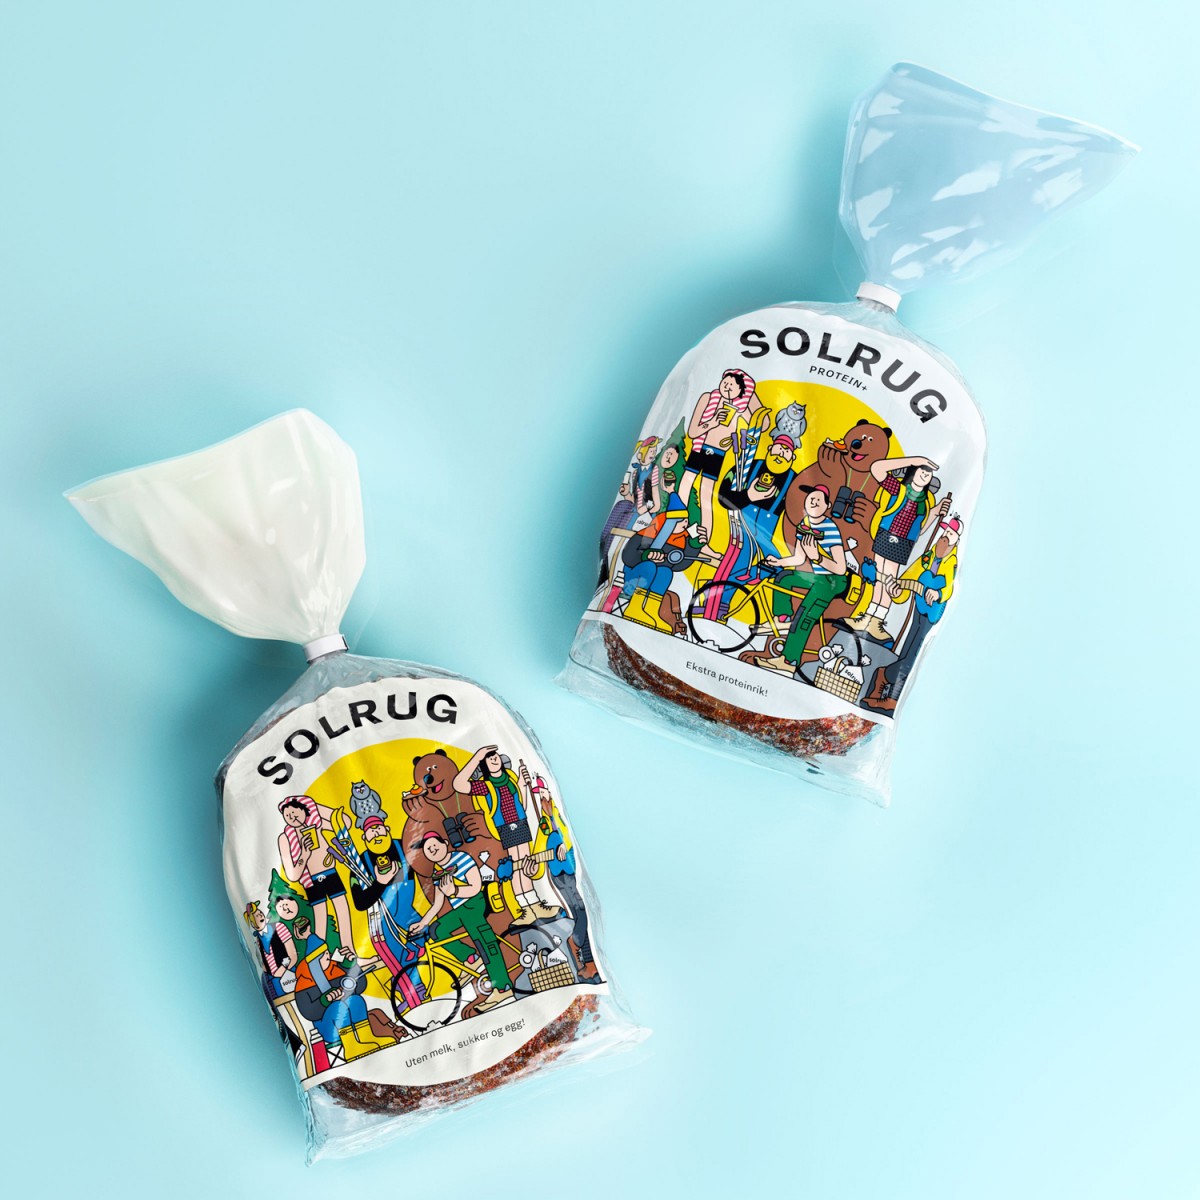 Package design for Solrug by Bielke & Yang, Norway, featuring illustration by Rami Niemi, Finland